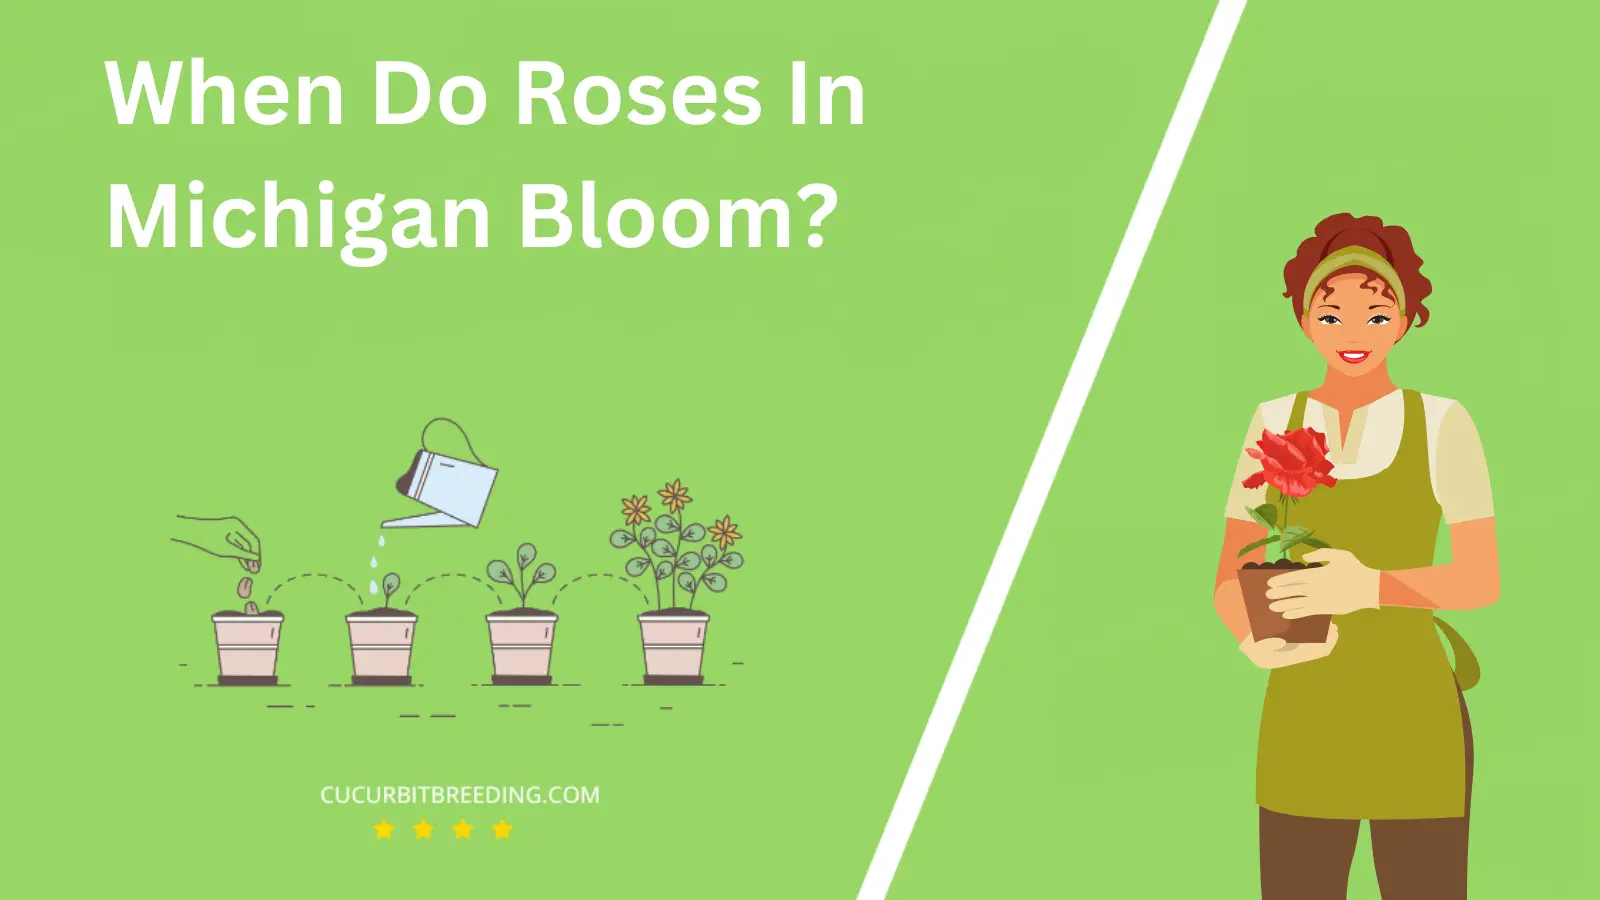 When Do Roses In Michigan Bloom?